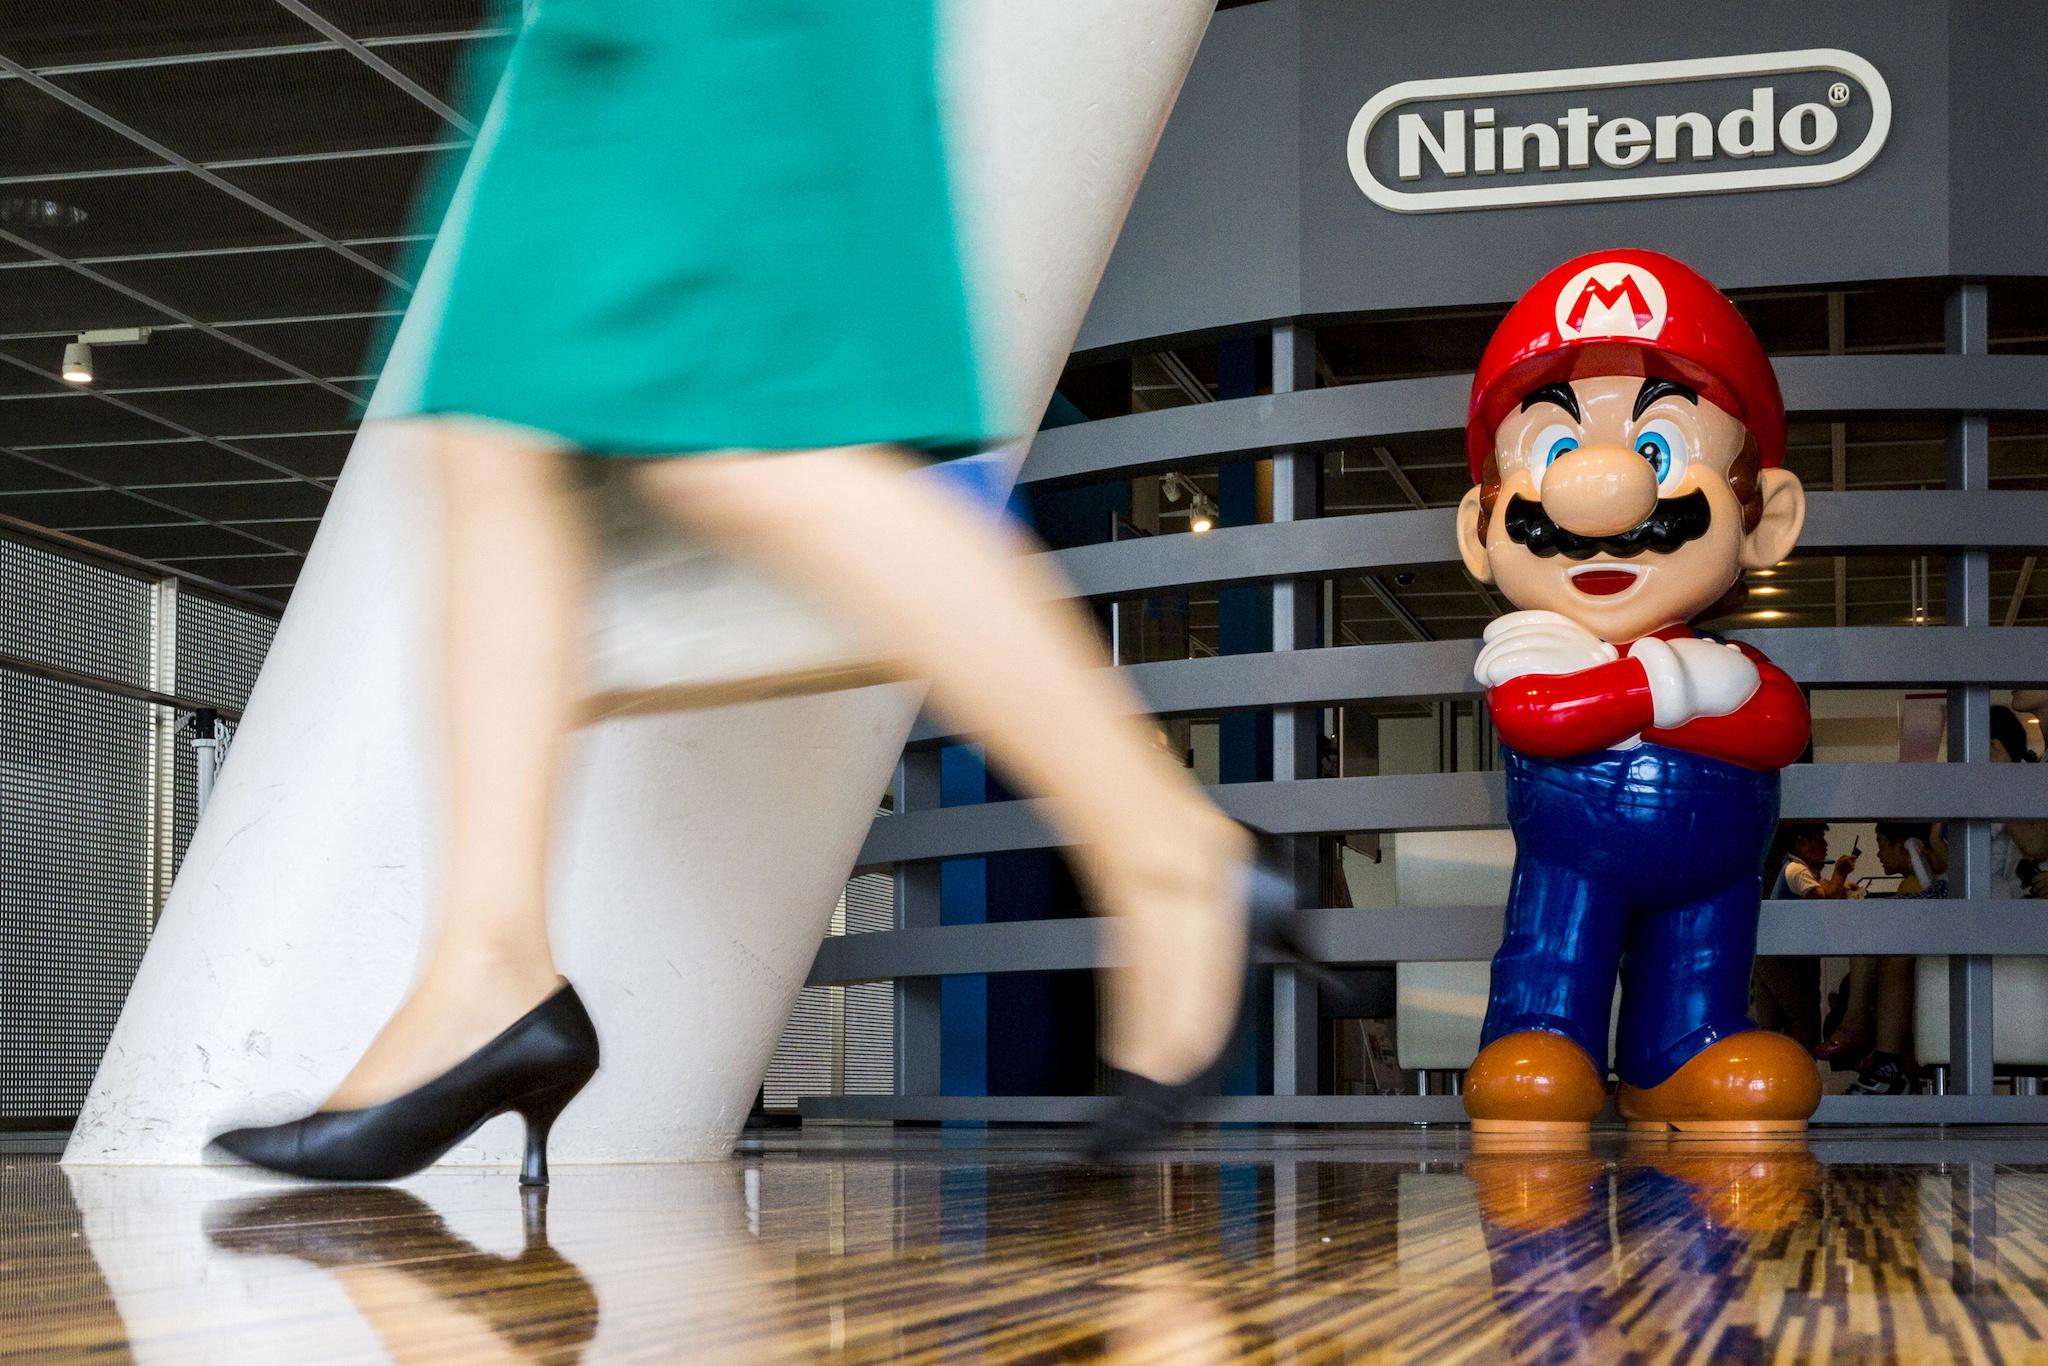 A woman walks past a figure of "Mario", a character in Nintendo's "Mario Bros." video games, at a Nintendo centre in Tokyo July 29, 2015